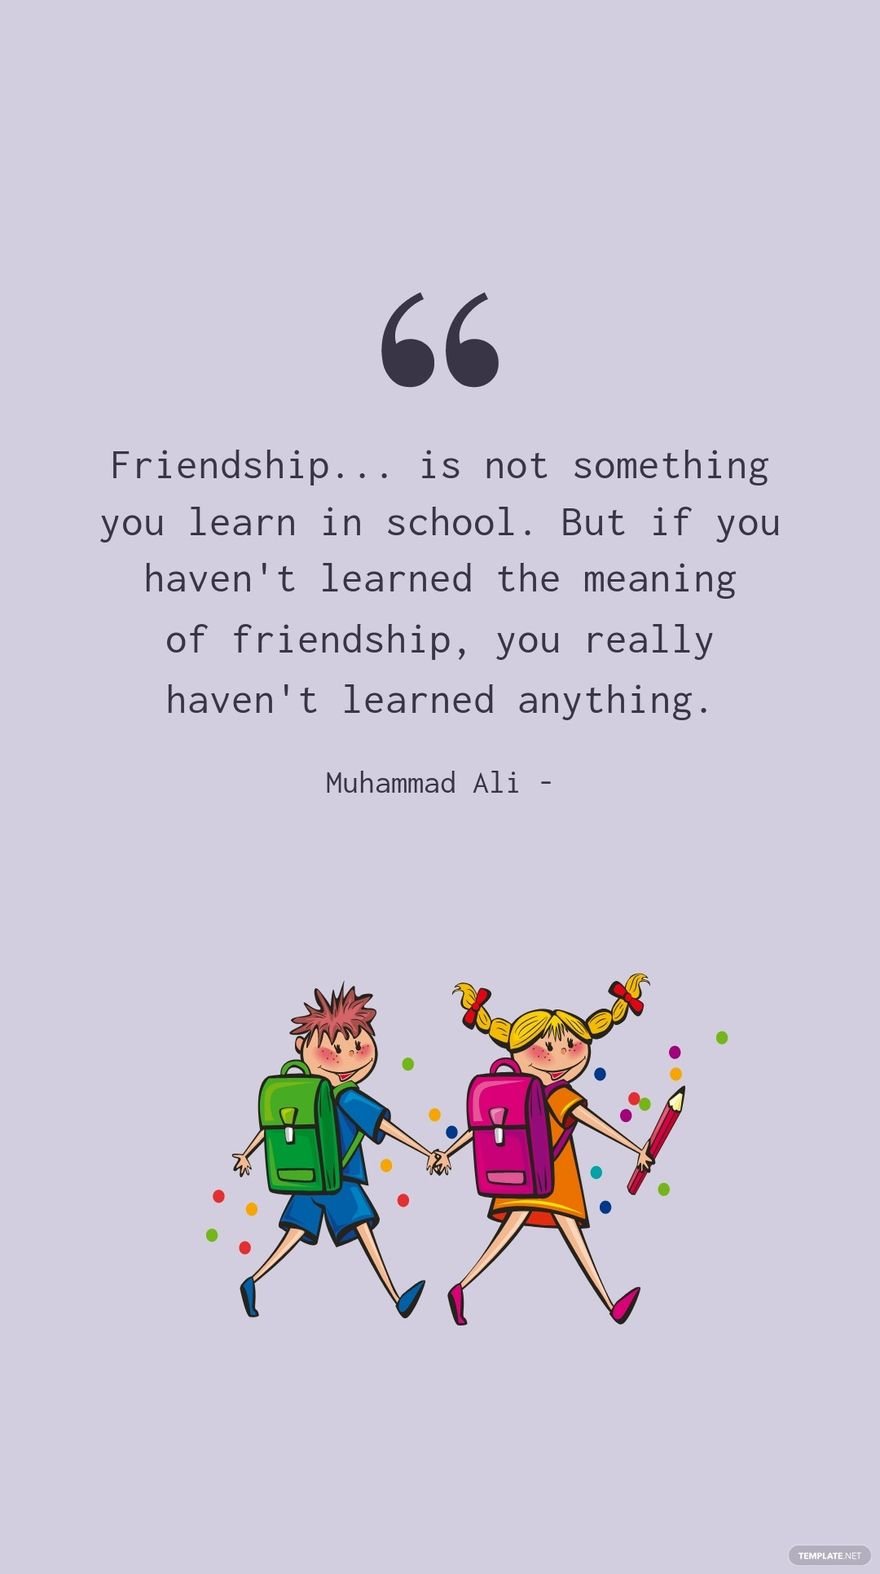 Muhammad Ali - Friendship... is not something you learn in school. But if you haven't learned the meaning of friendship, you really haven't learned anything.